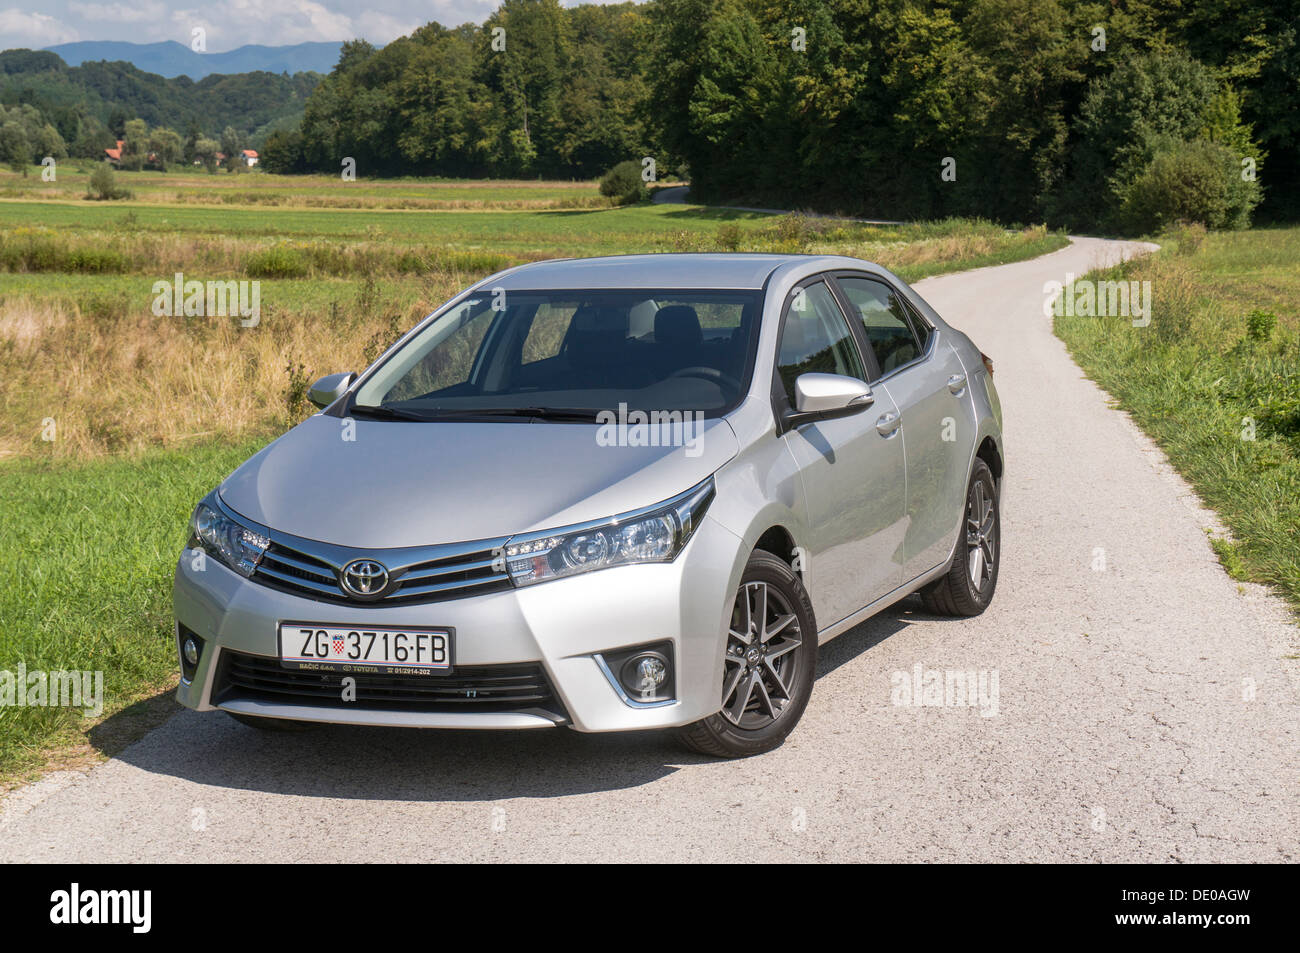 2010 toyota corolla in red hi-res stock photography and images - Alamy